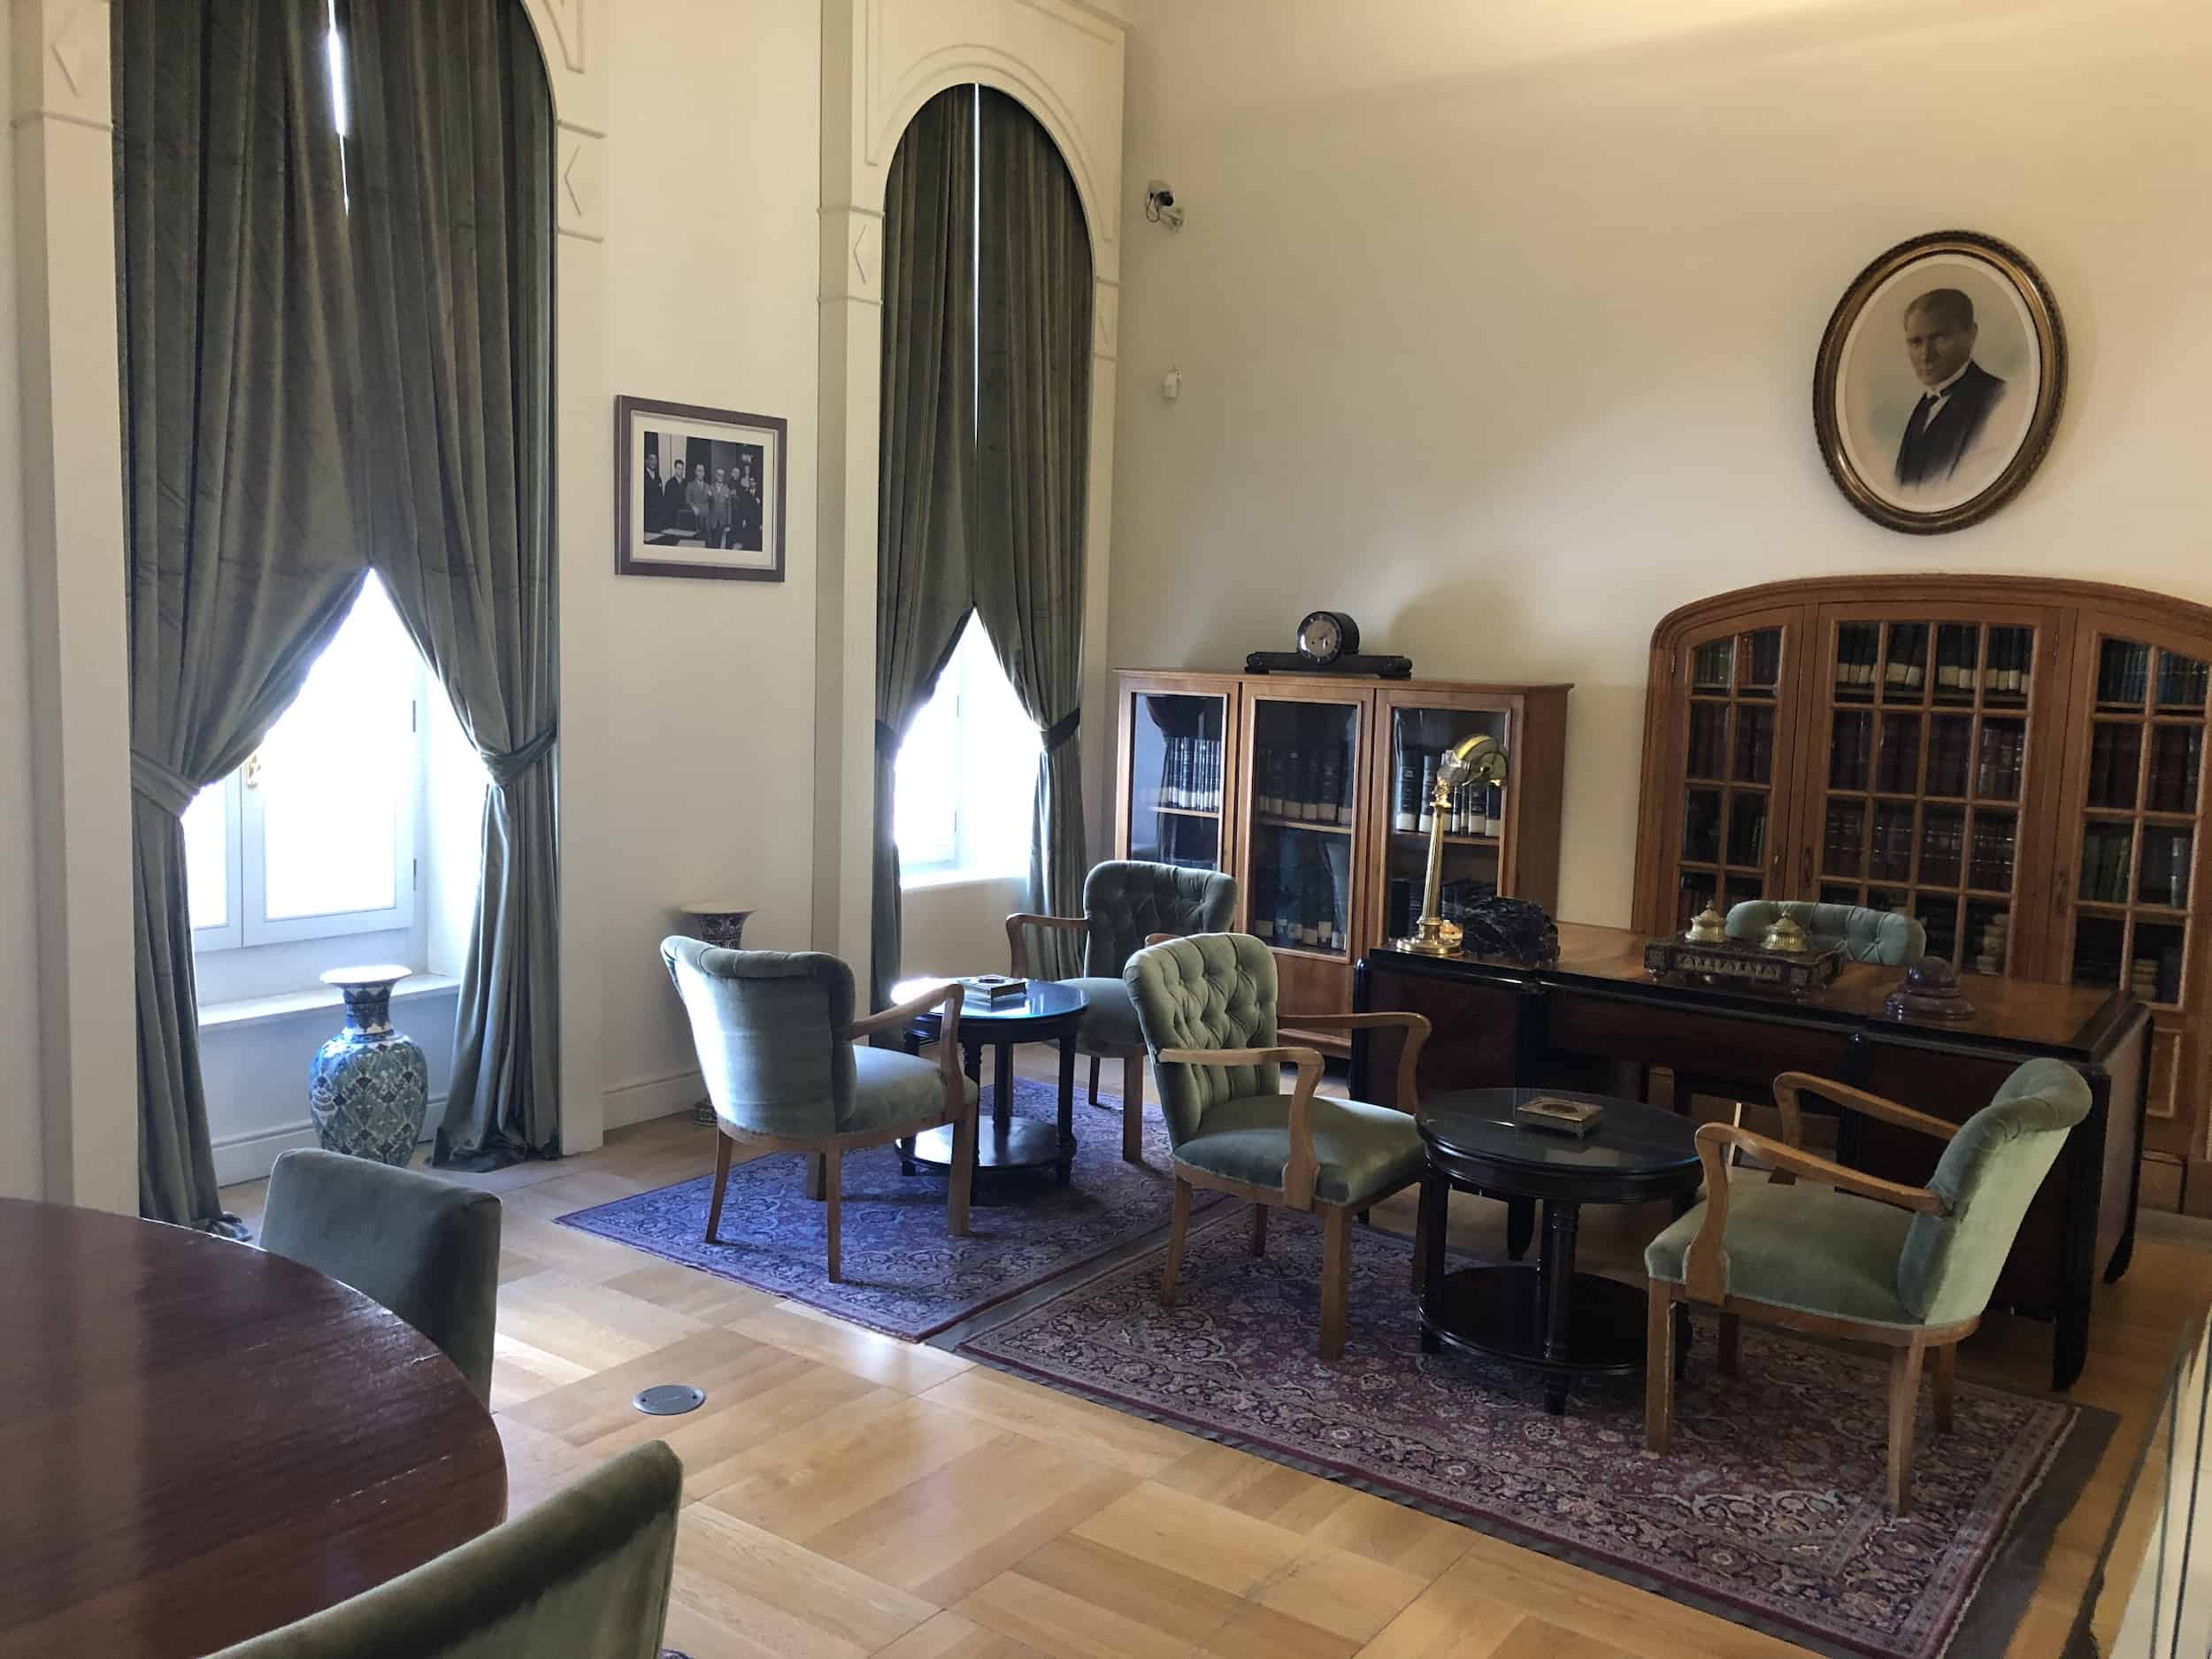 Branch manager's office at the İşbank Museum in Eminönü, Istanbul, Turkey